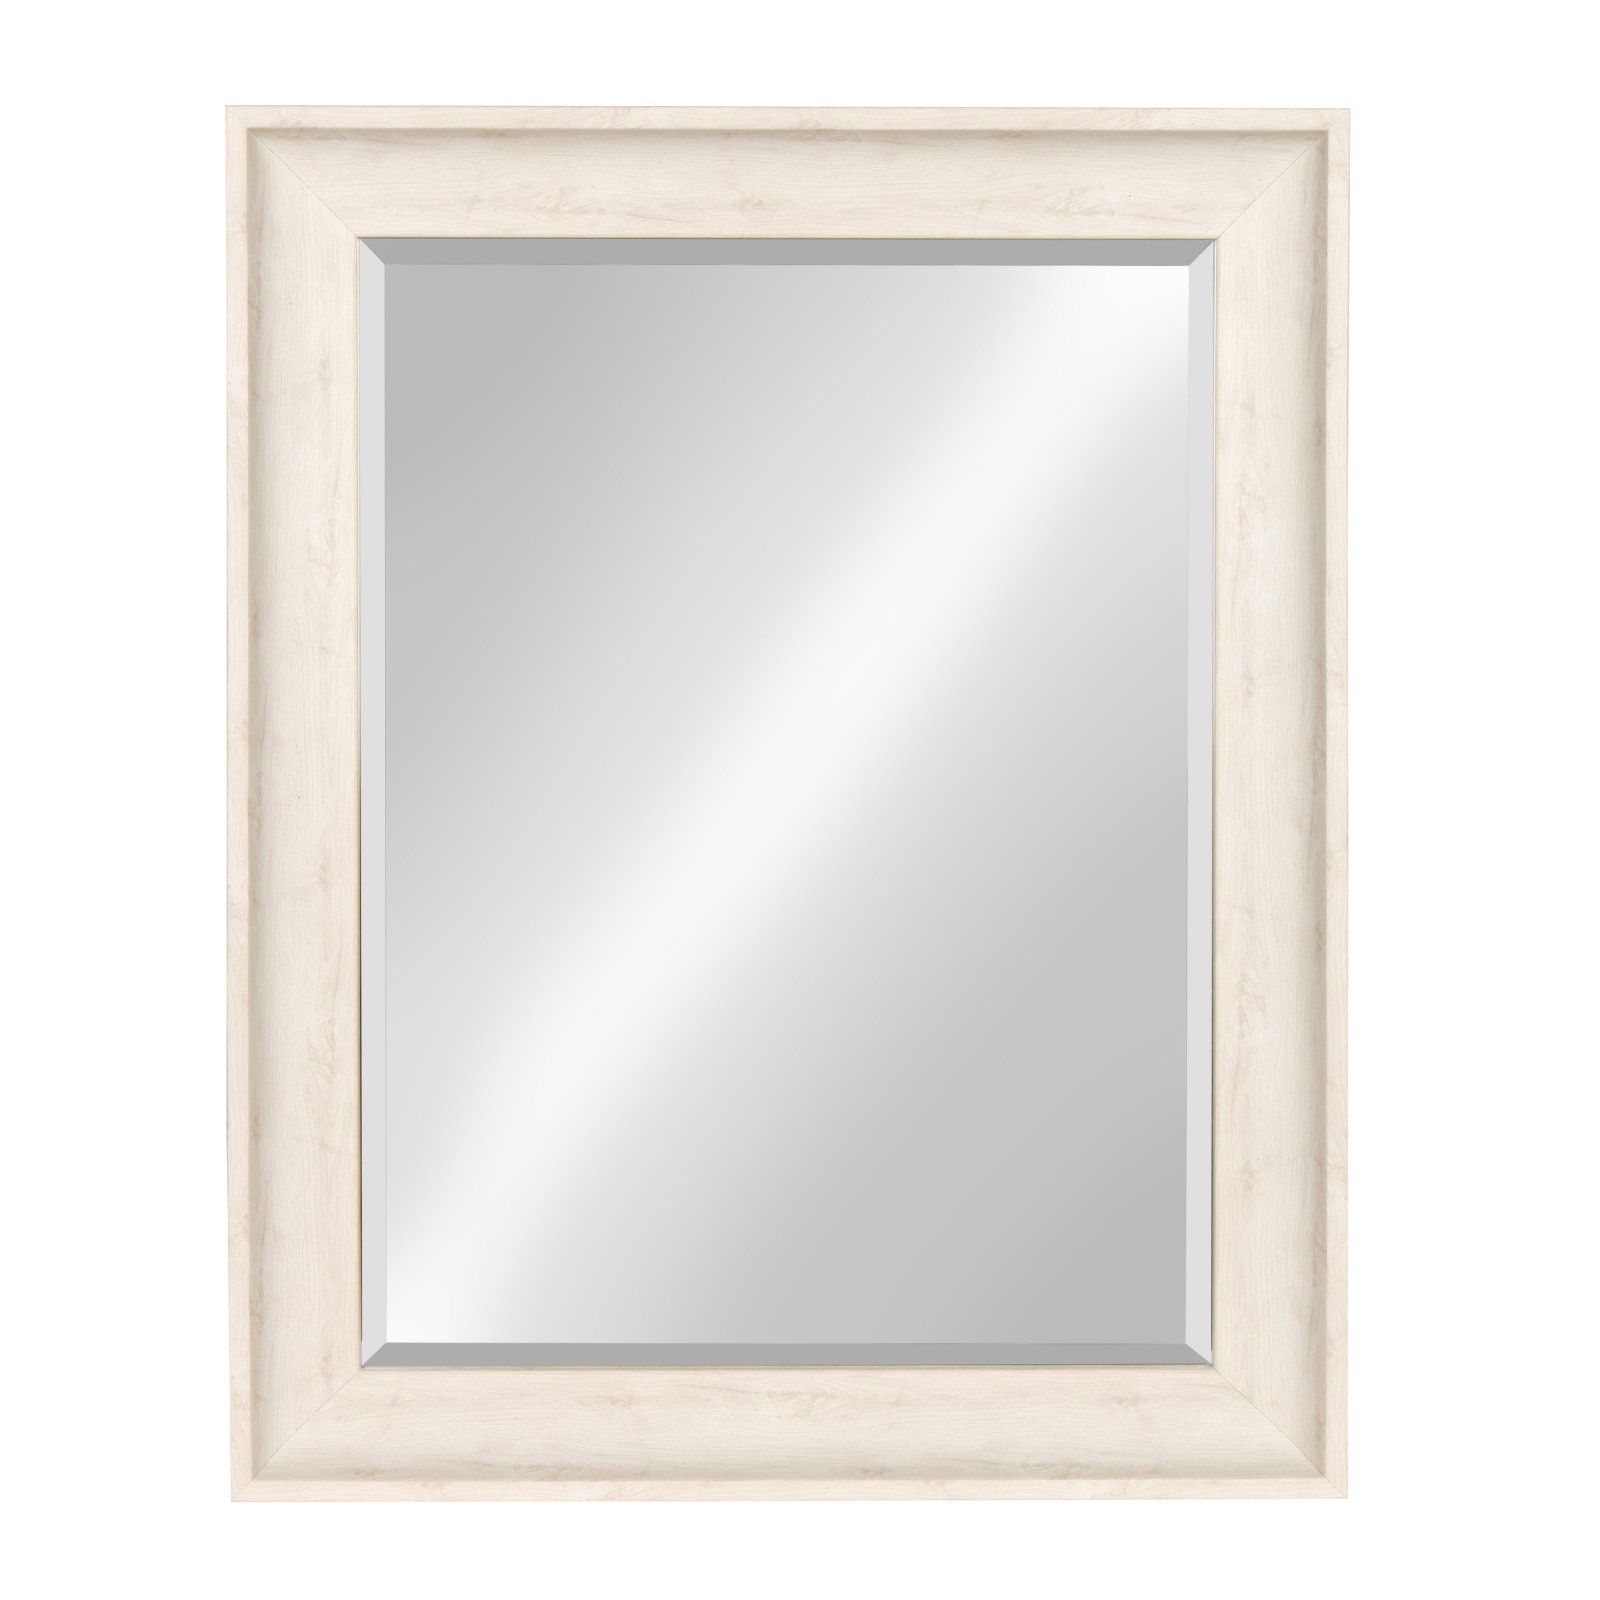 Kate And Laurel Mckinley Framed Wall Vanity Mirror Within Lugo Rectangle Accent Mirrors (View 13 of 20)